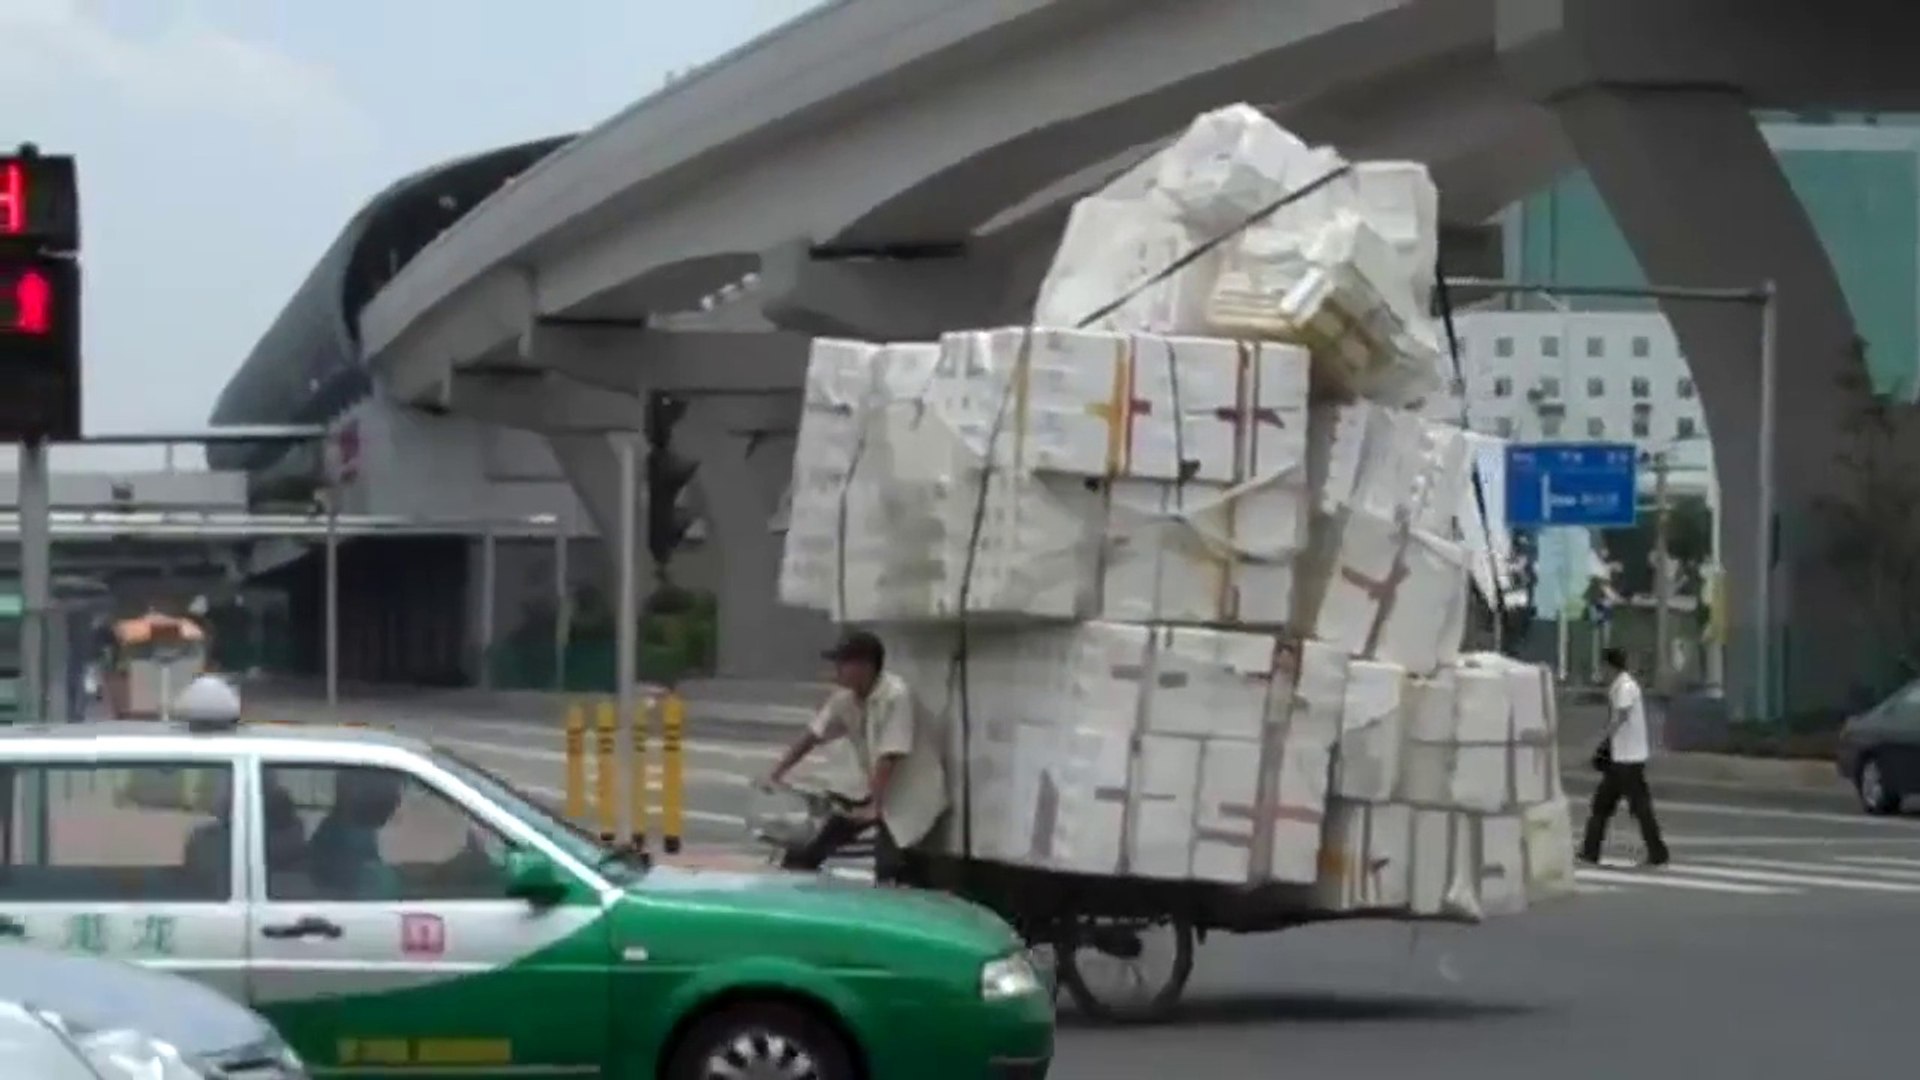 37 Of The Most Overloaded Vehicles Ever